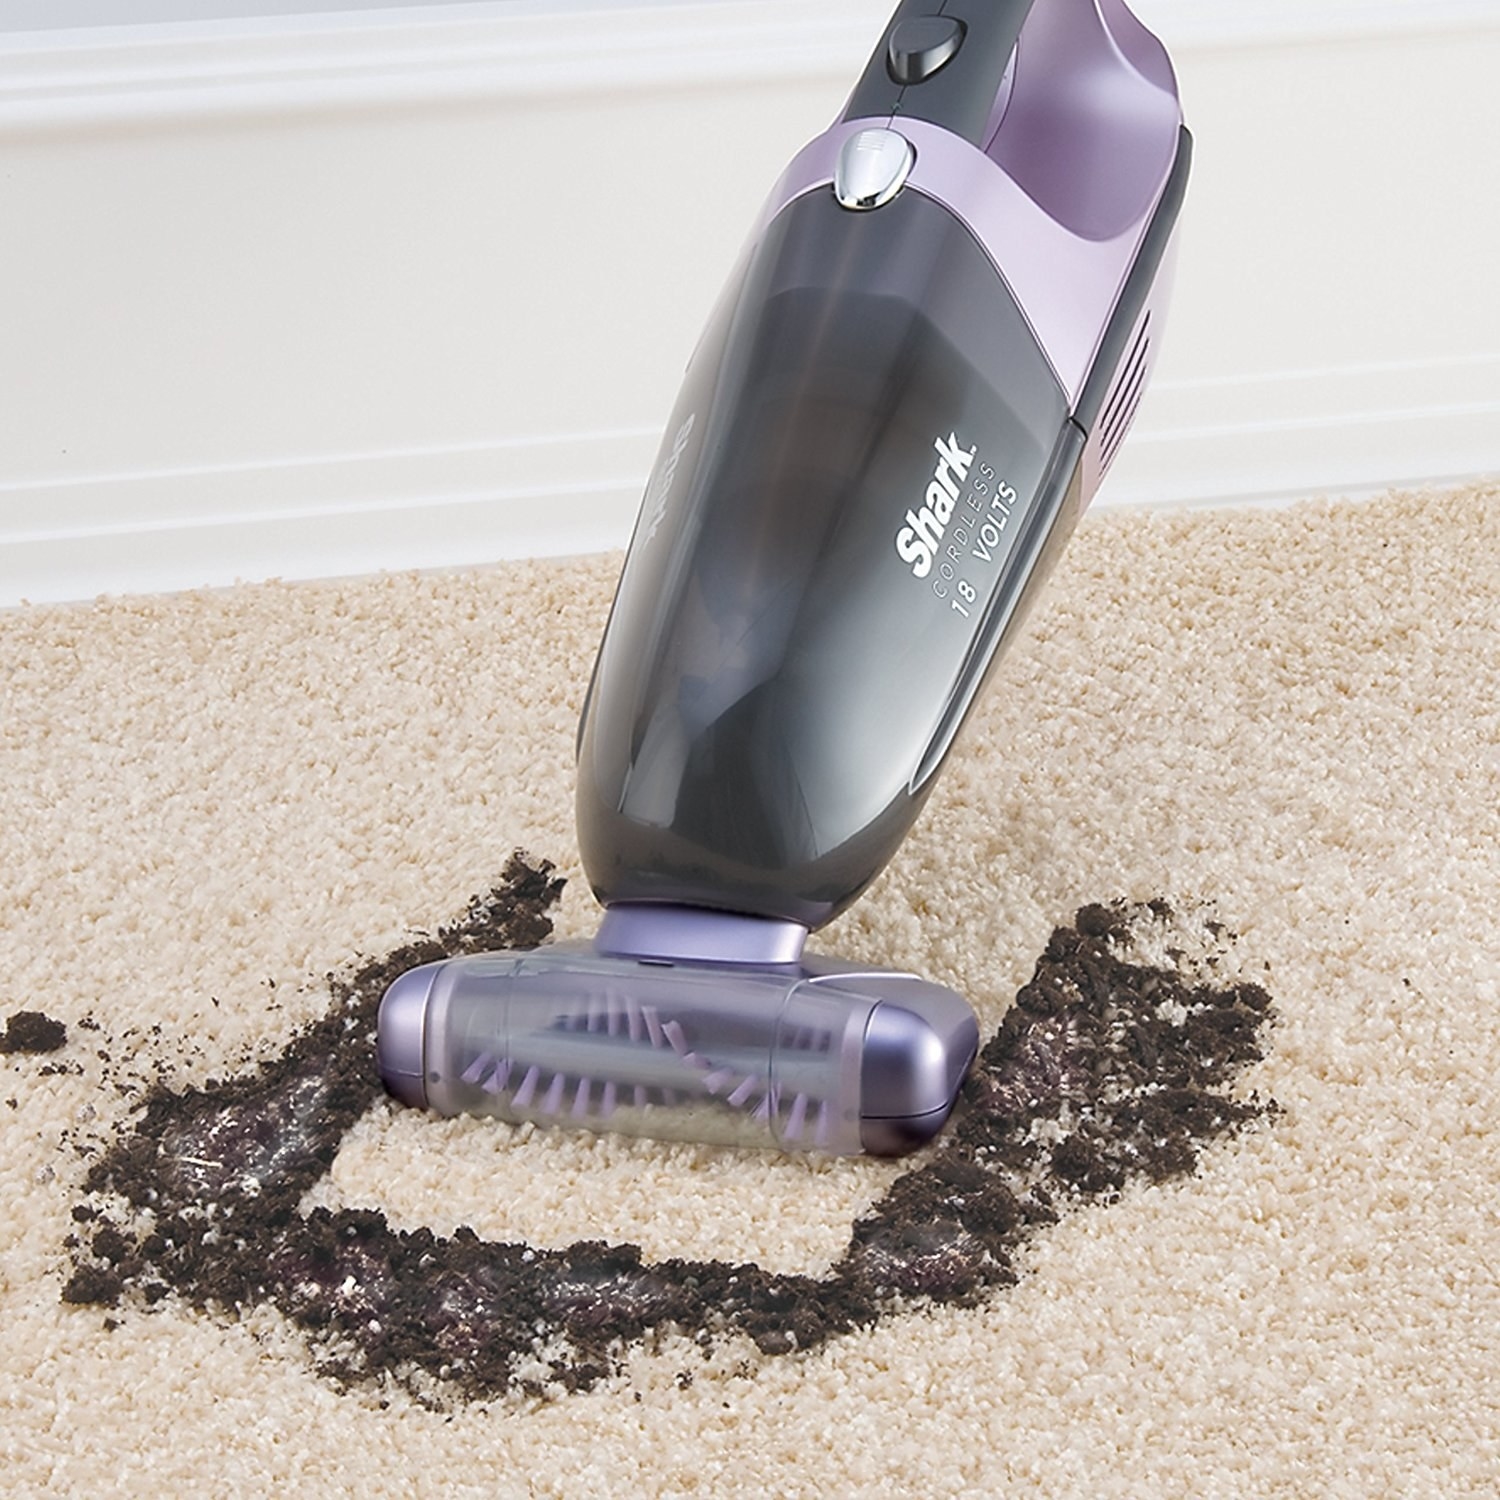 The Shark vacuum sucking up dirt from a carpeted floor